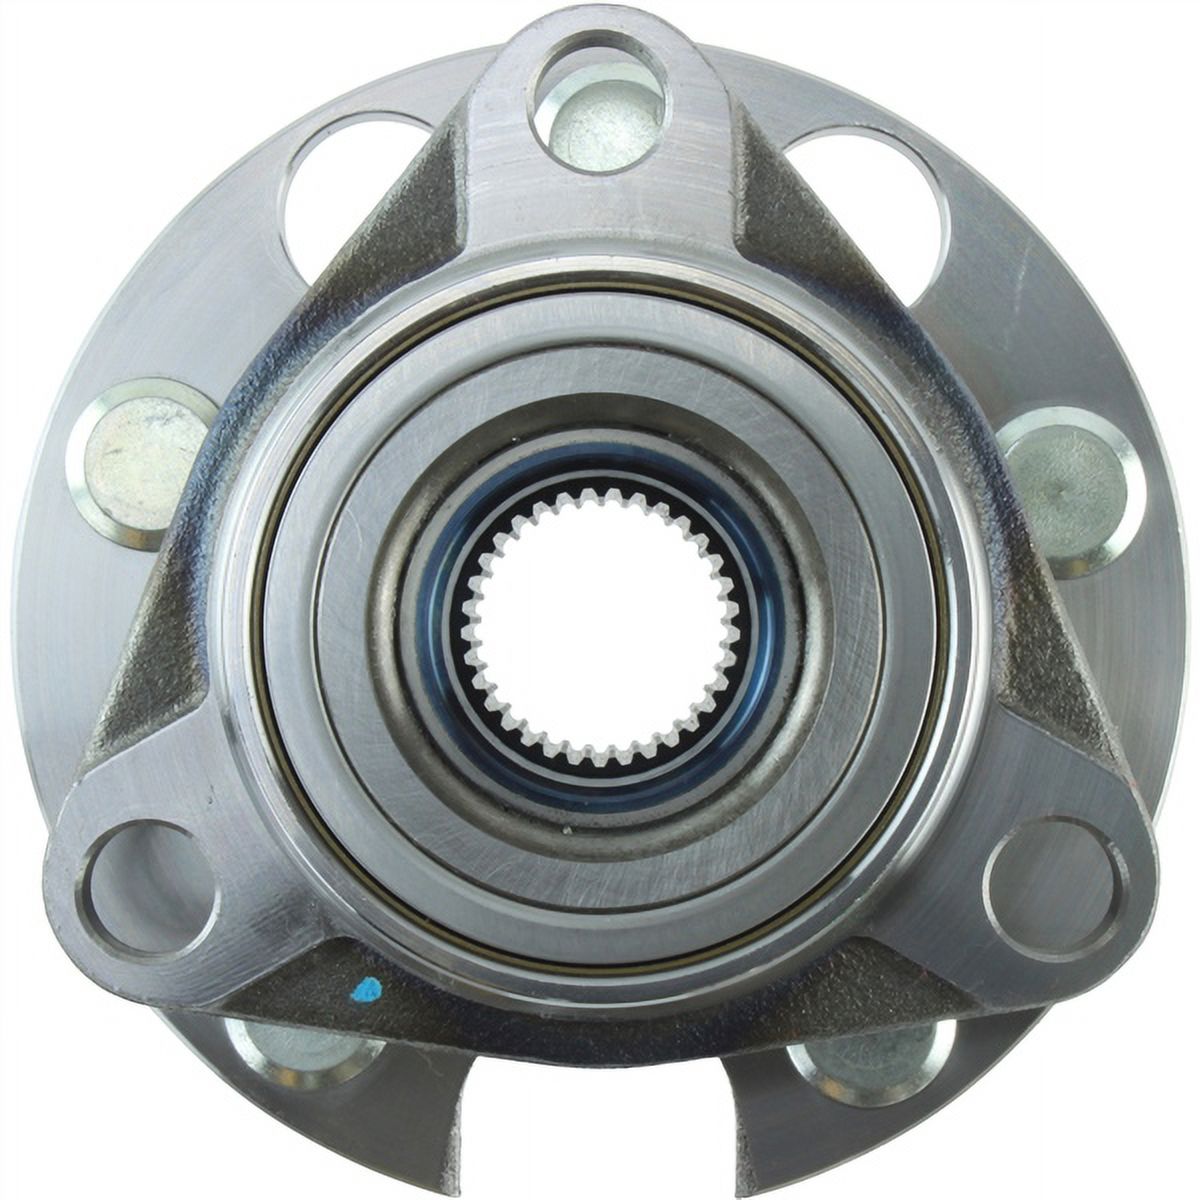 CENTRIC PARTS - HUB ASSEMBLY Fits select: 1984-1988 PONTIAC FIERO, 1982-1989 CHEVROLET CELEBRITY - image 2 of 5